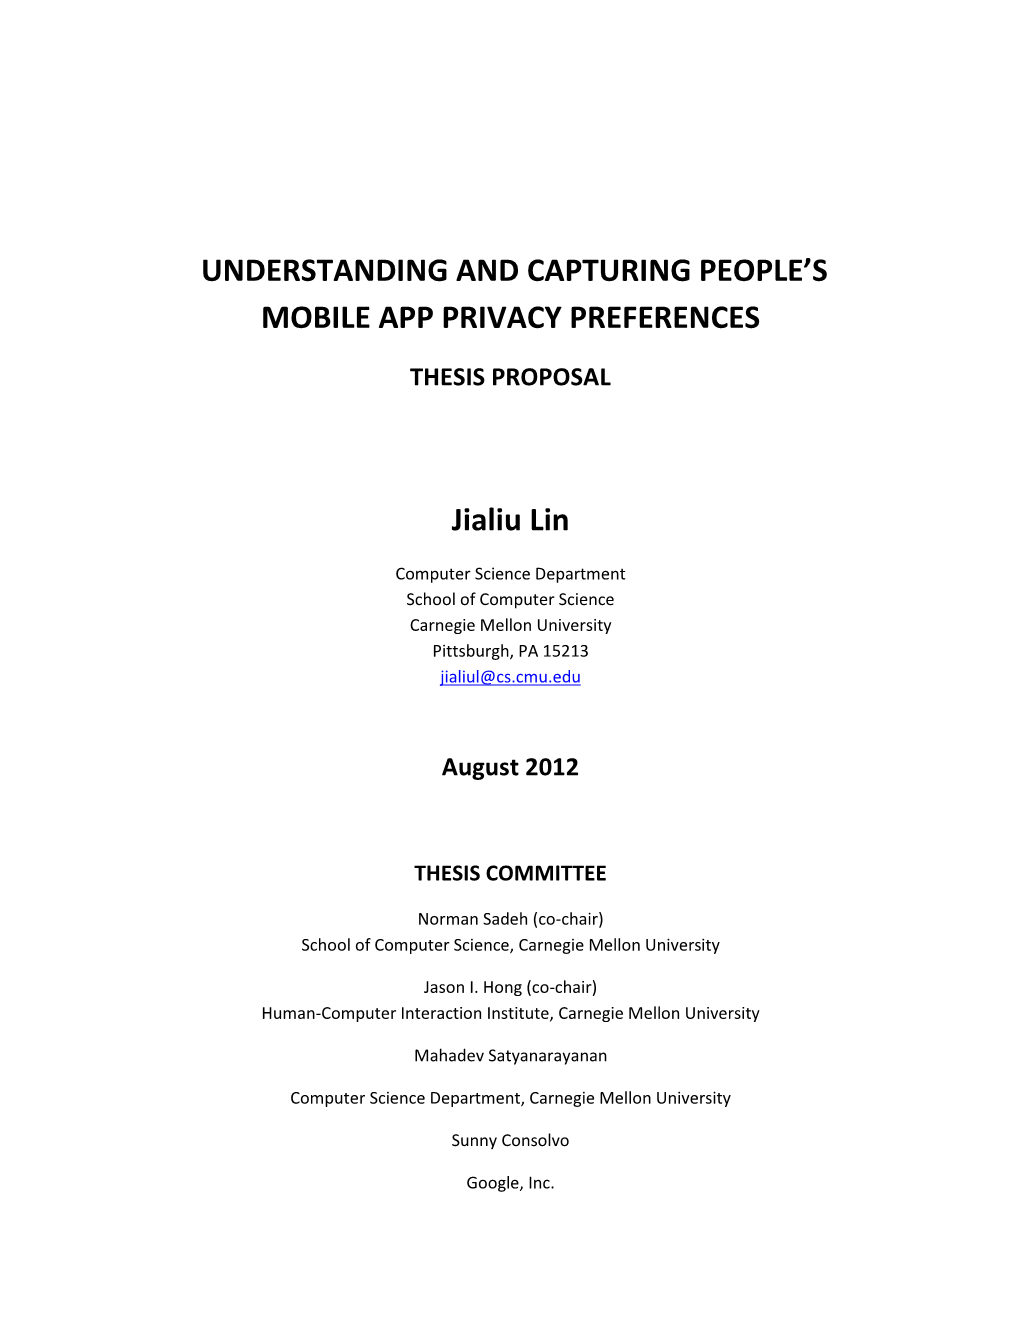 Understanding and Capturing People's Mobile App Privacy